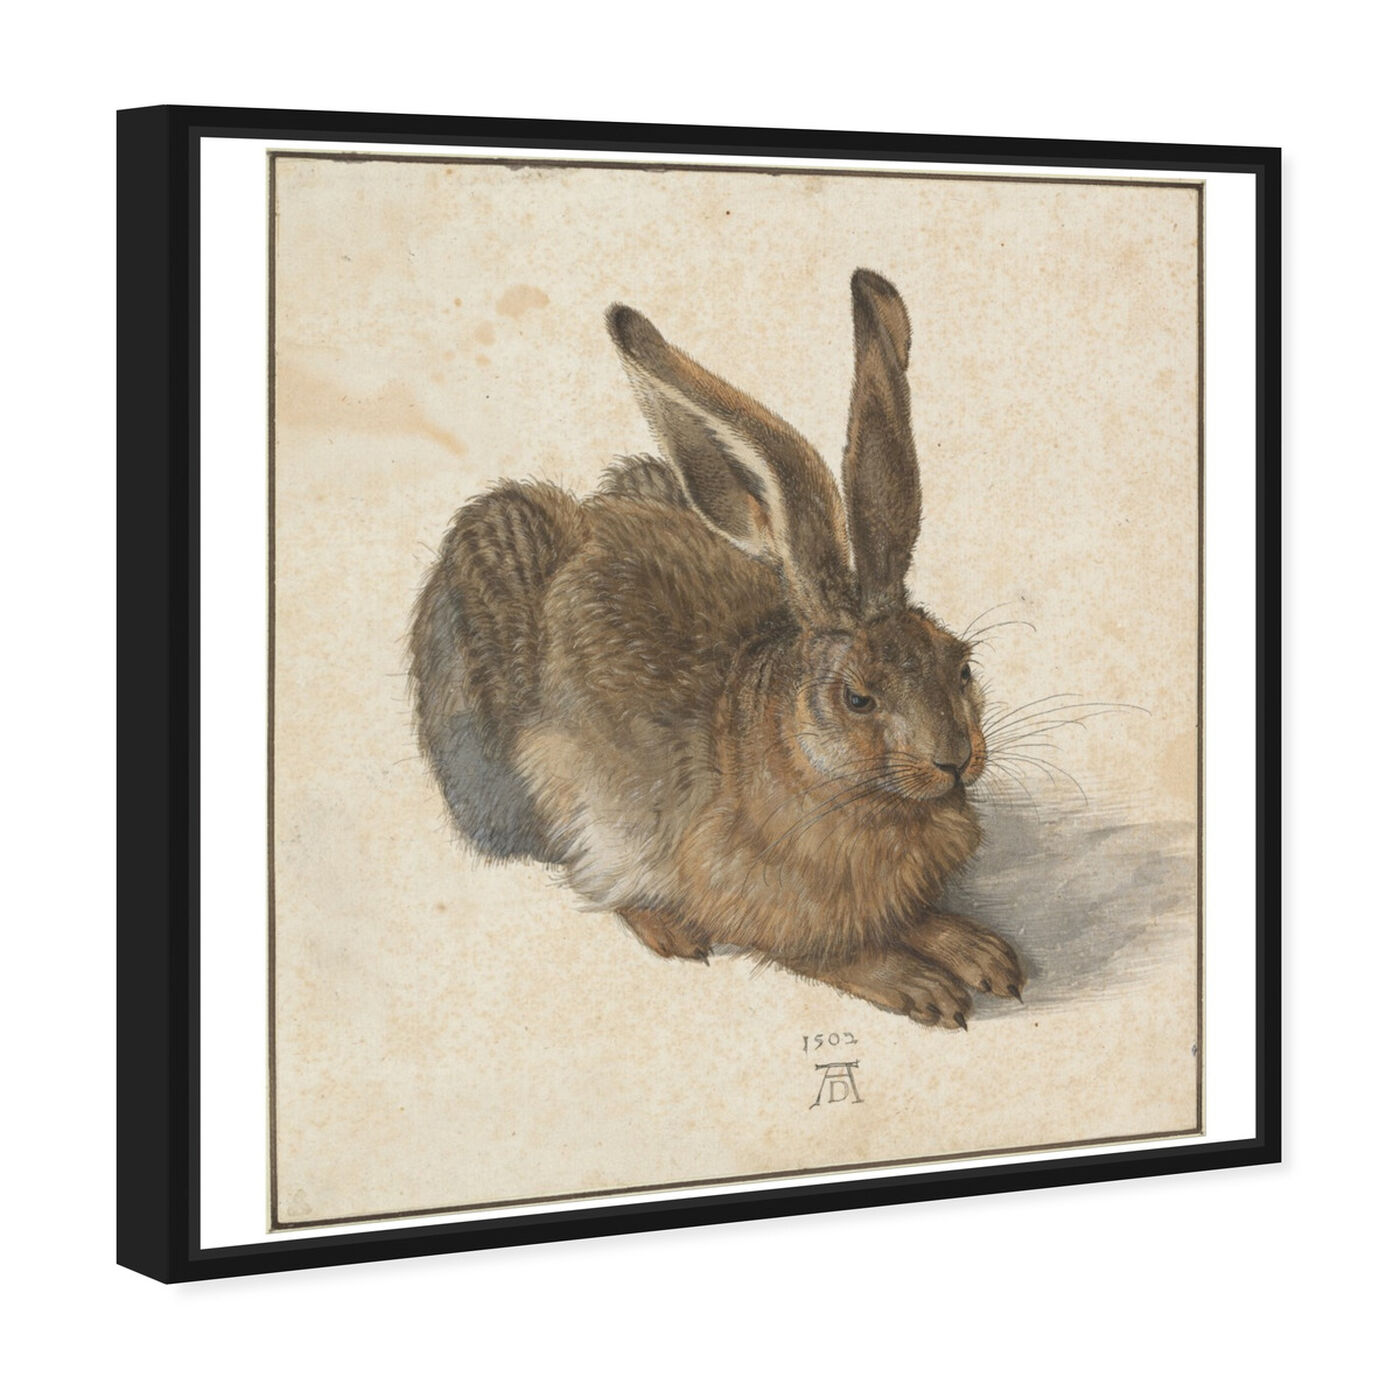 Angled view of Durer - Hare featuring animals and farm animals art.